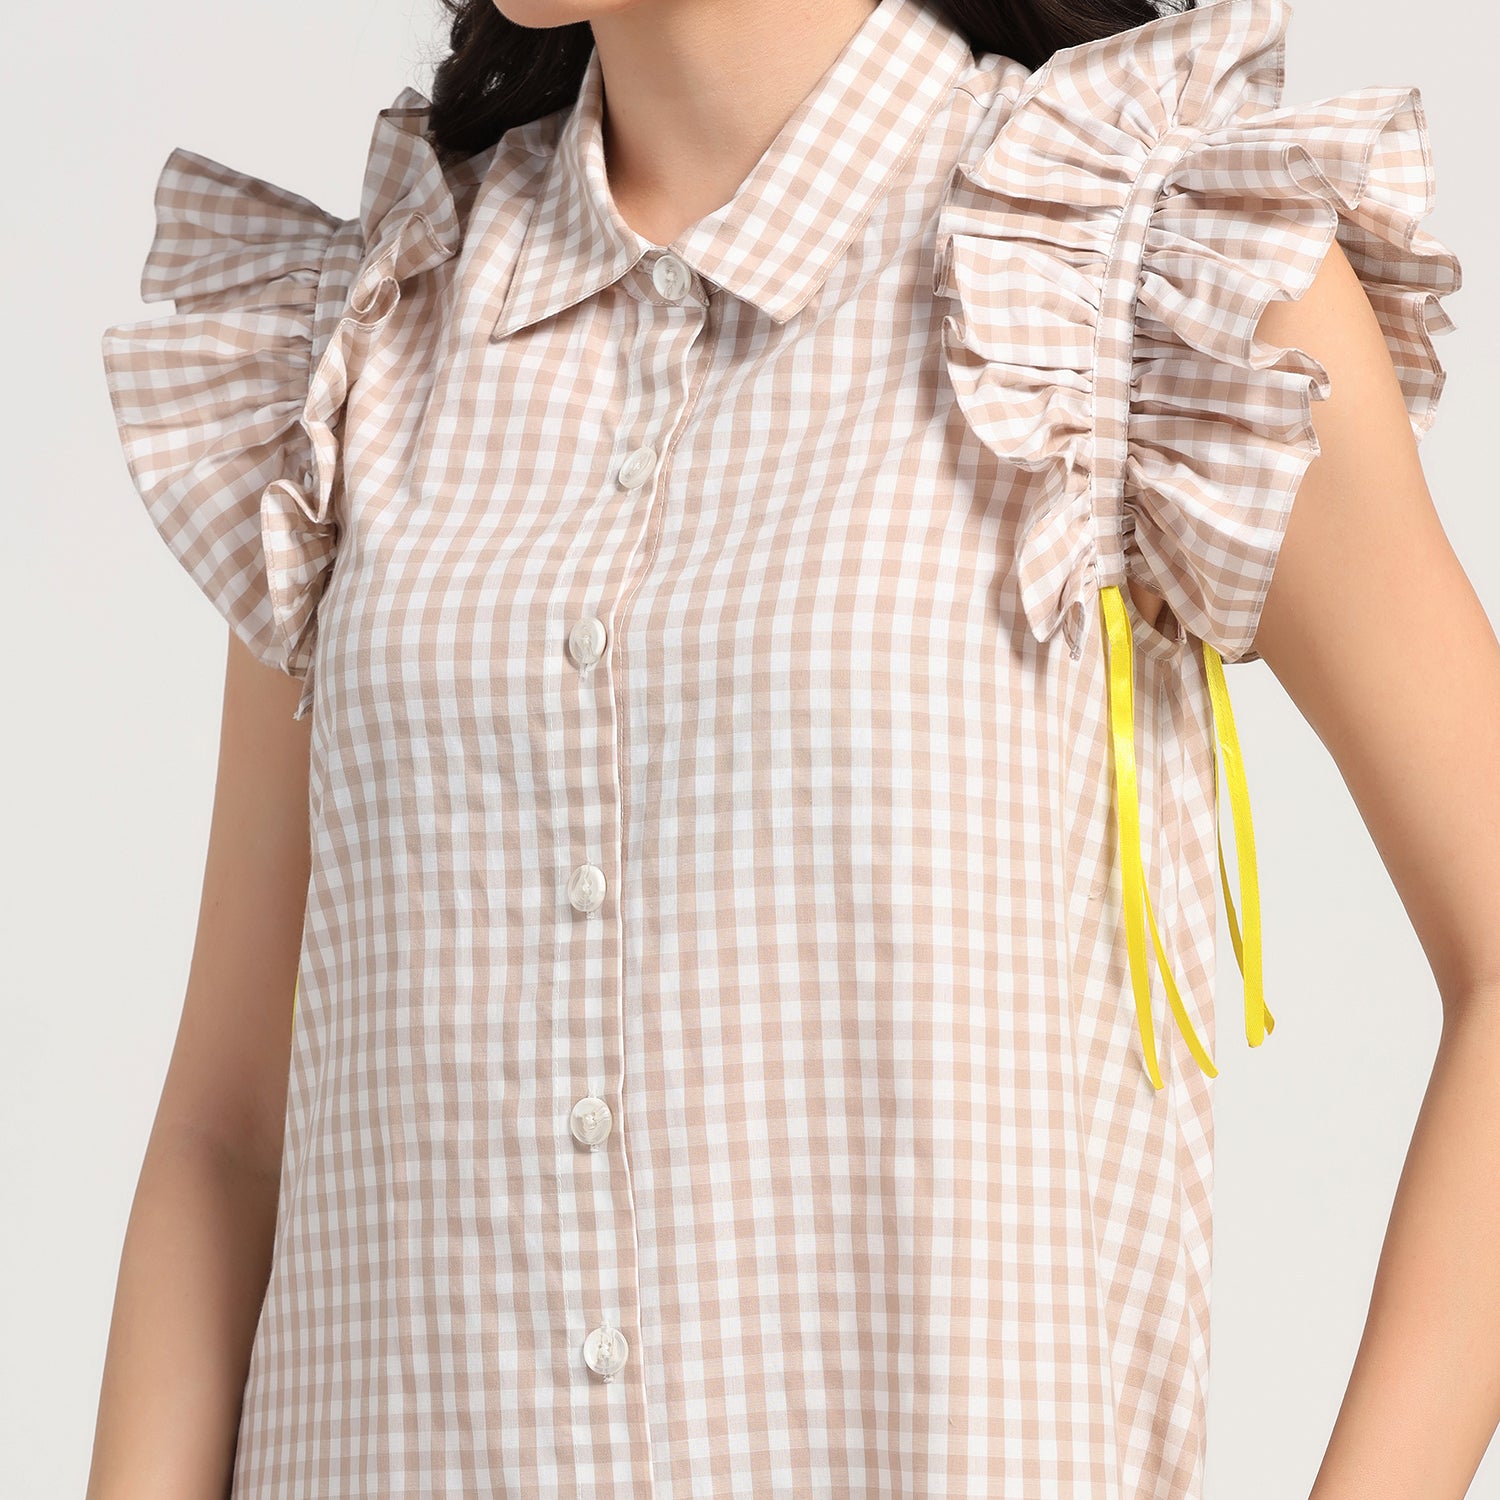 Beige Check Maple Leaf Embroidery Dress